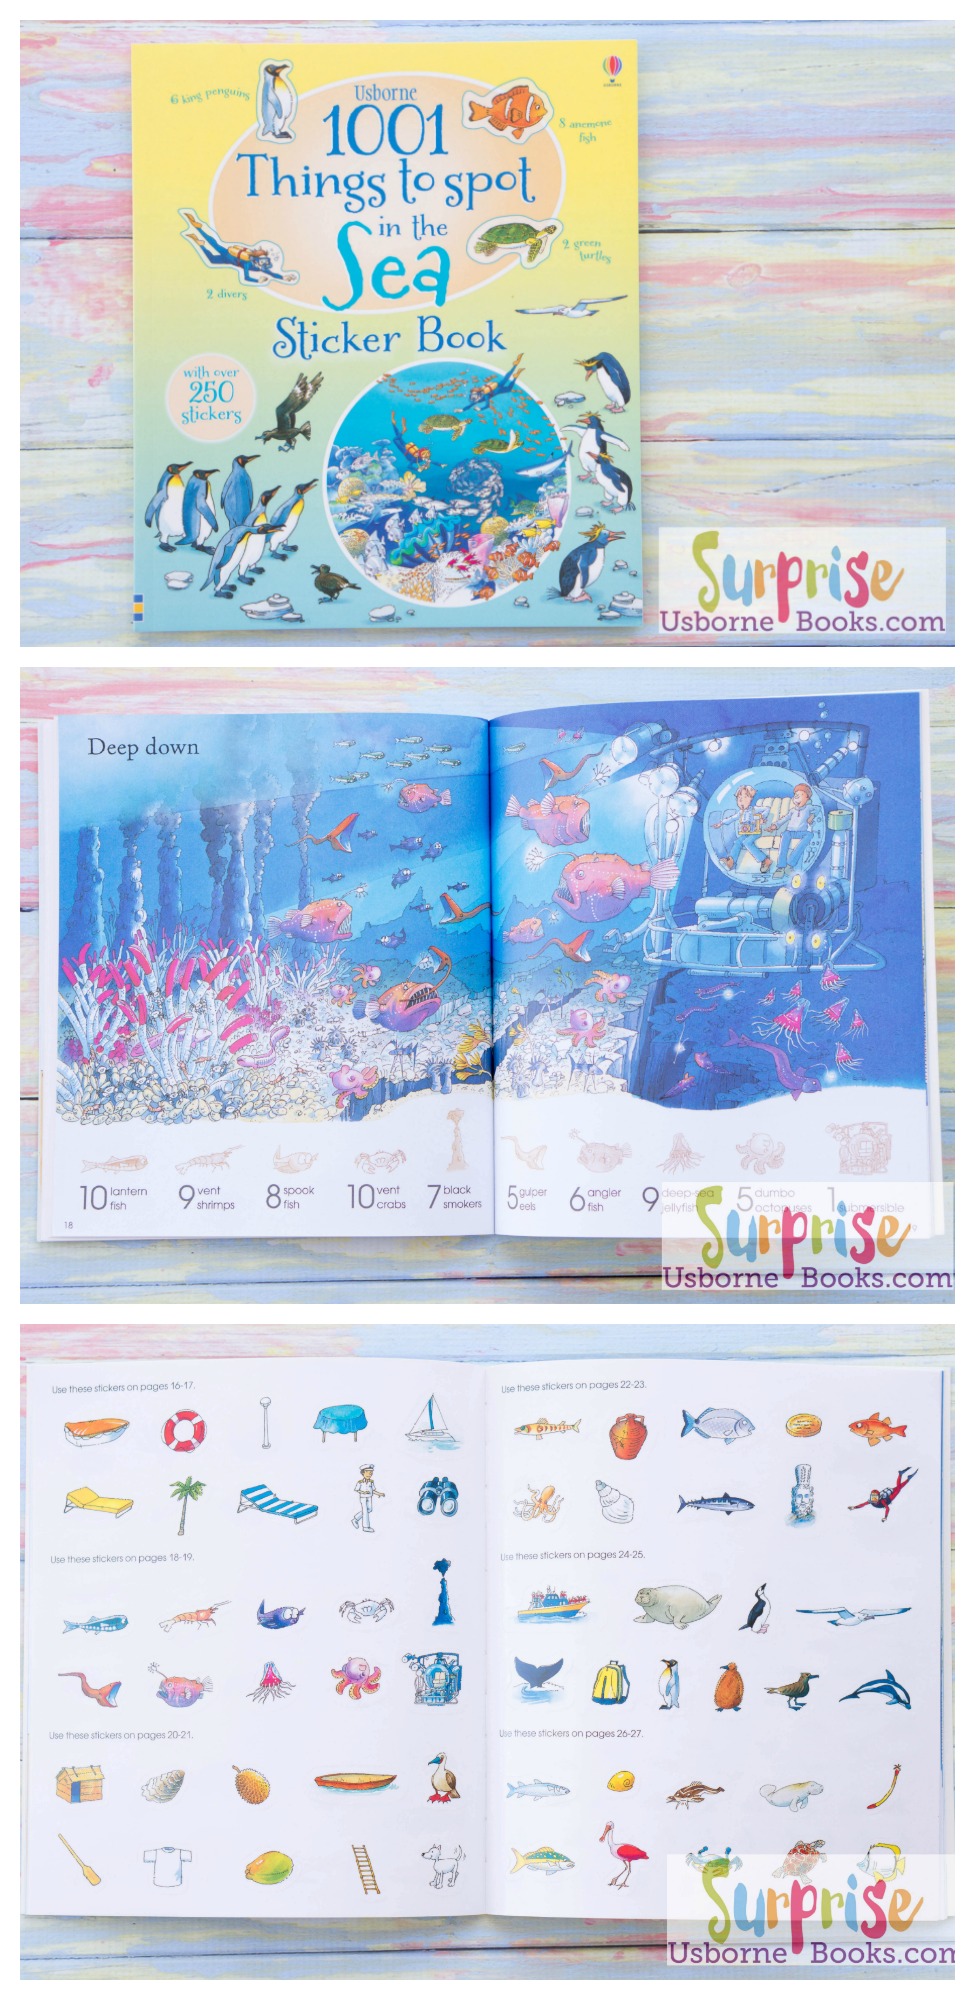 "Interactive sticker book full of busy, detailed illustrations. Items to spot within the main picture are shown in the border as silhouettes and each has a corresponding sticker which children can find, match and add in the correct place. With over a thousand things for children to find, count and talk about." - 1001 Things to Spot in the Sea Sticker Book - https://z4065.myubam.com/p/5015/1001-things-to-spot-in-the-sea-sticker-book